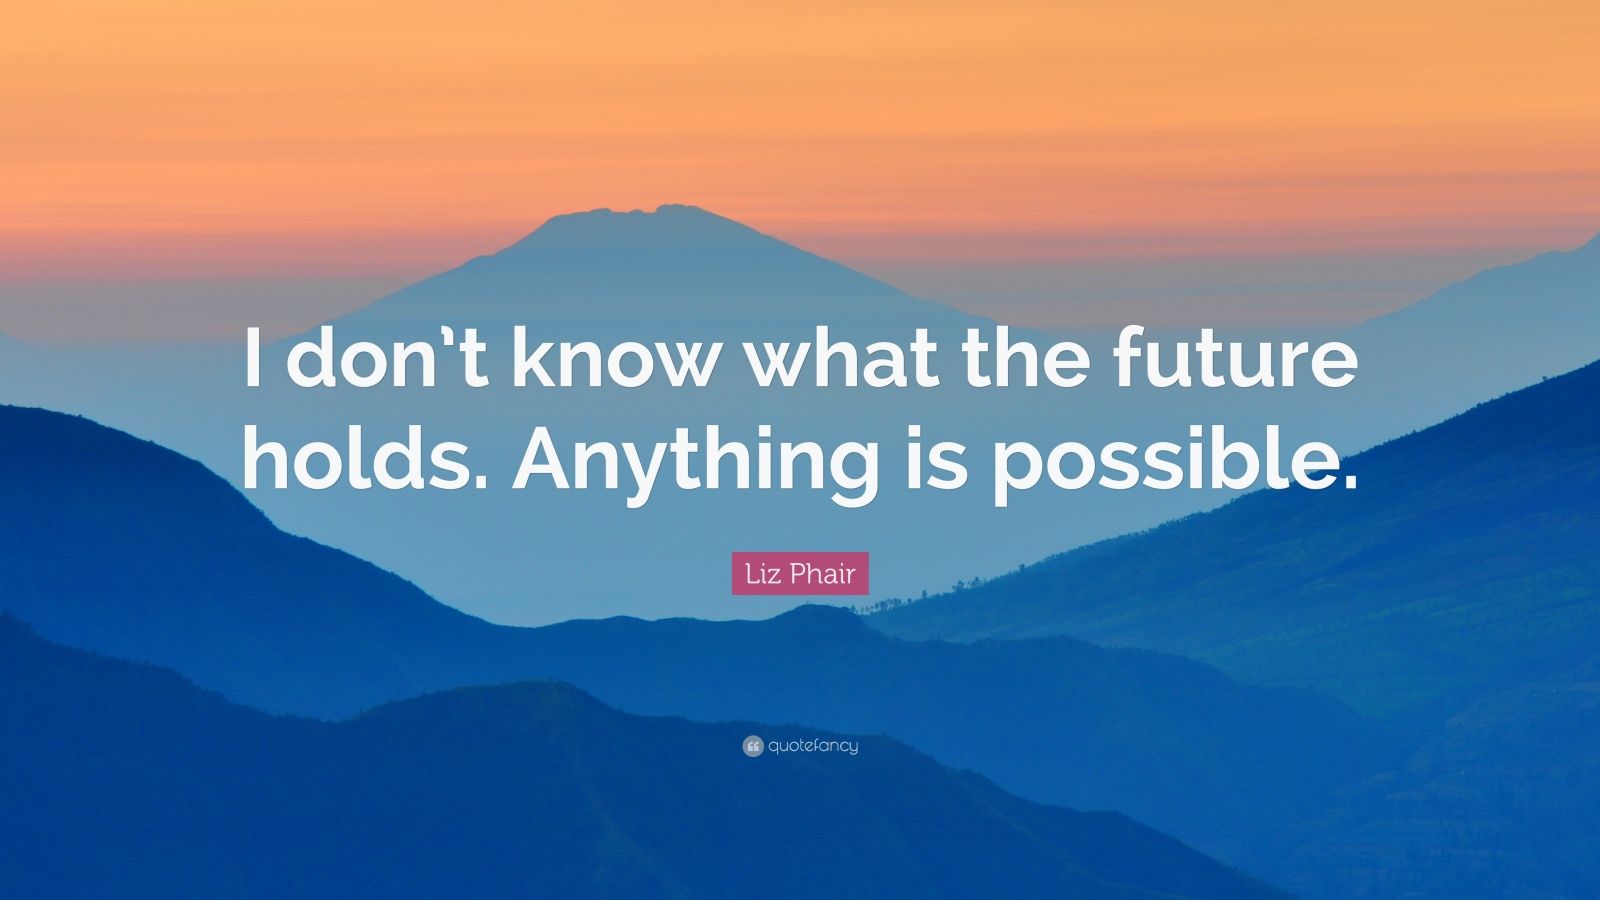 Liz Phair Quote: “I don’t know what the future holds. Anything is